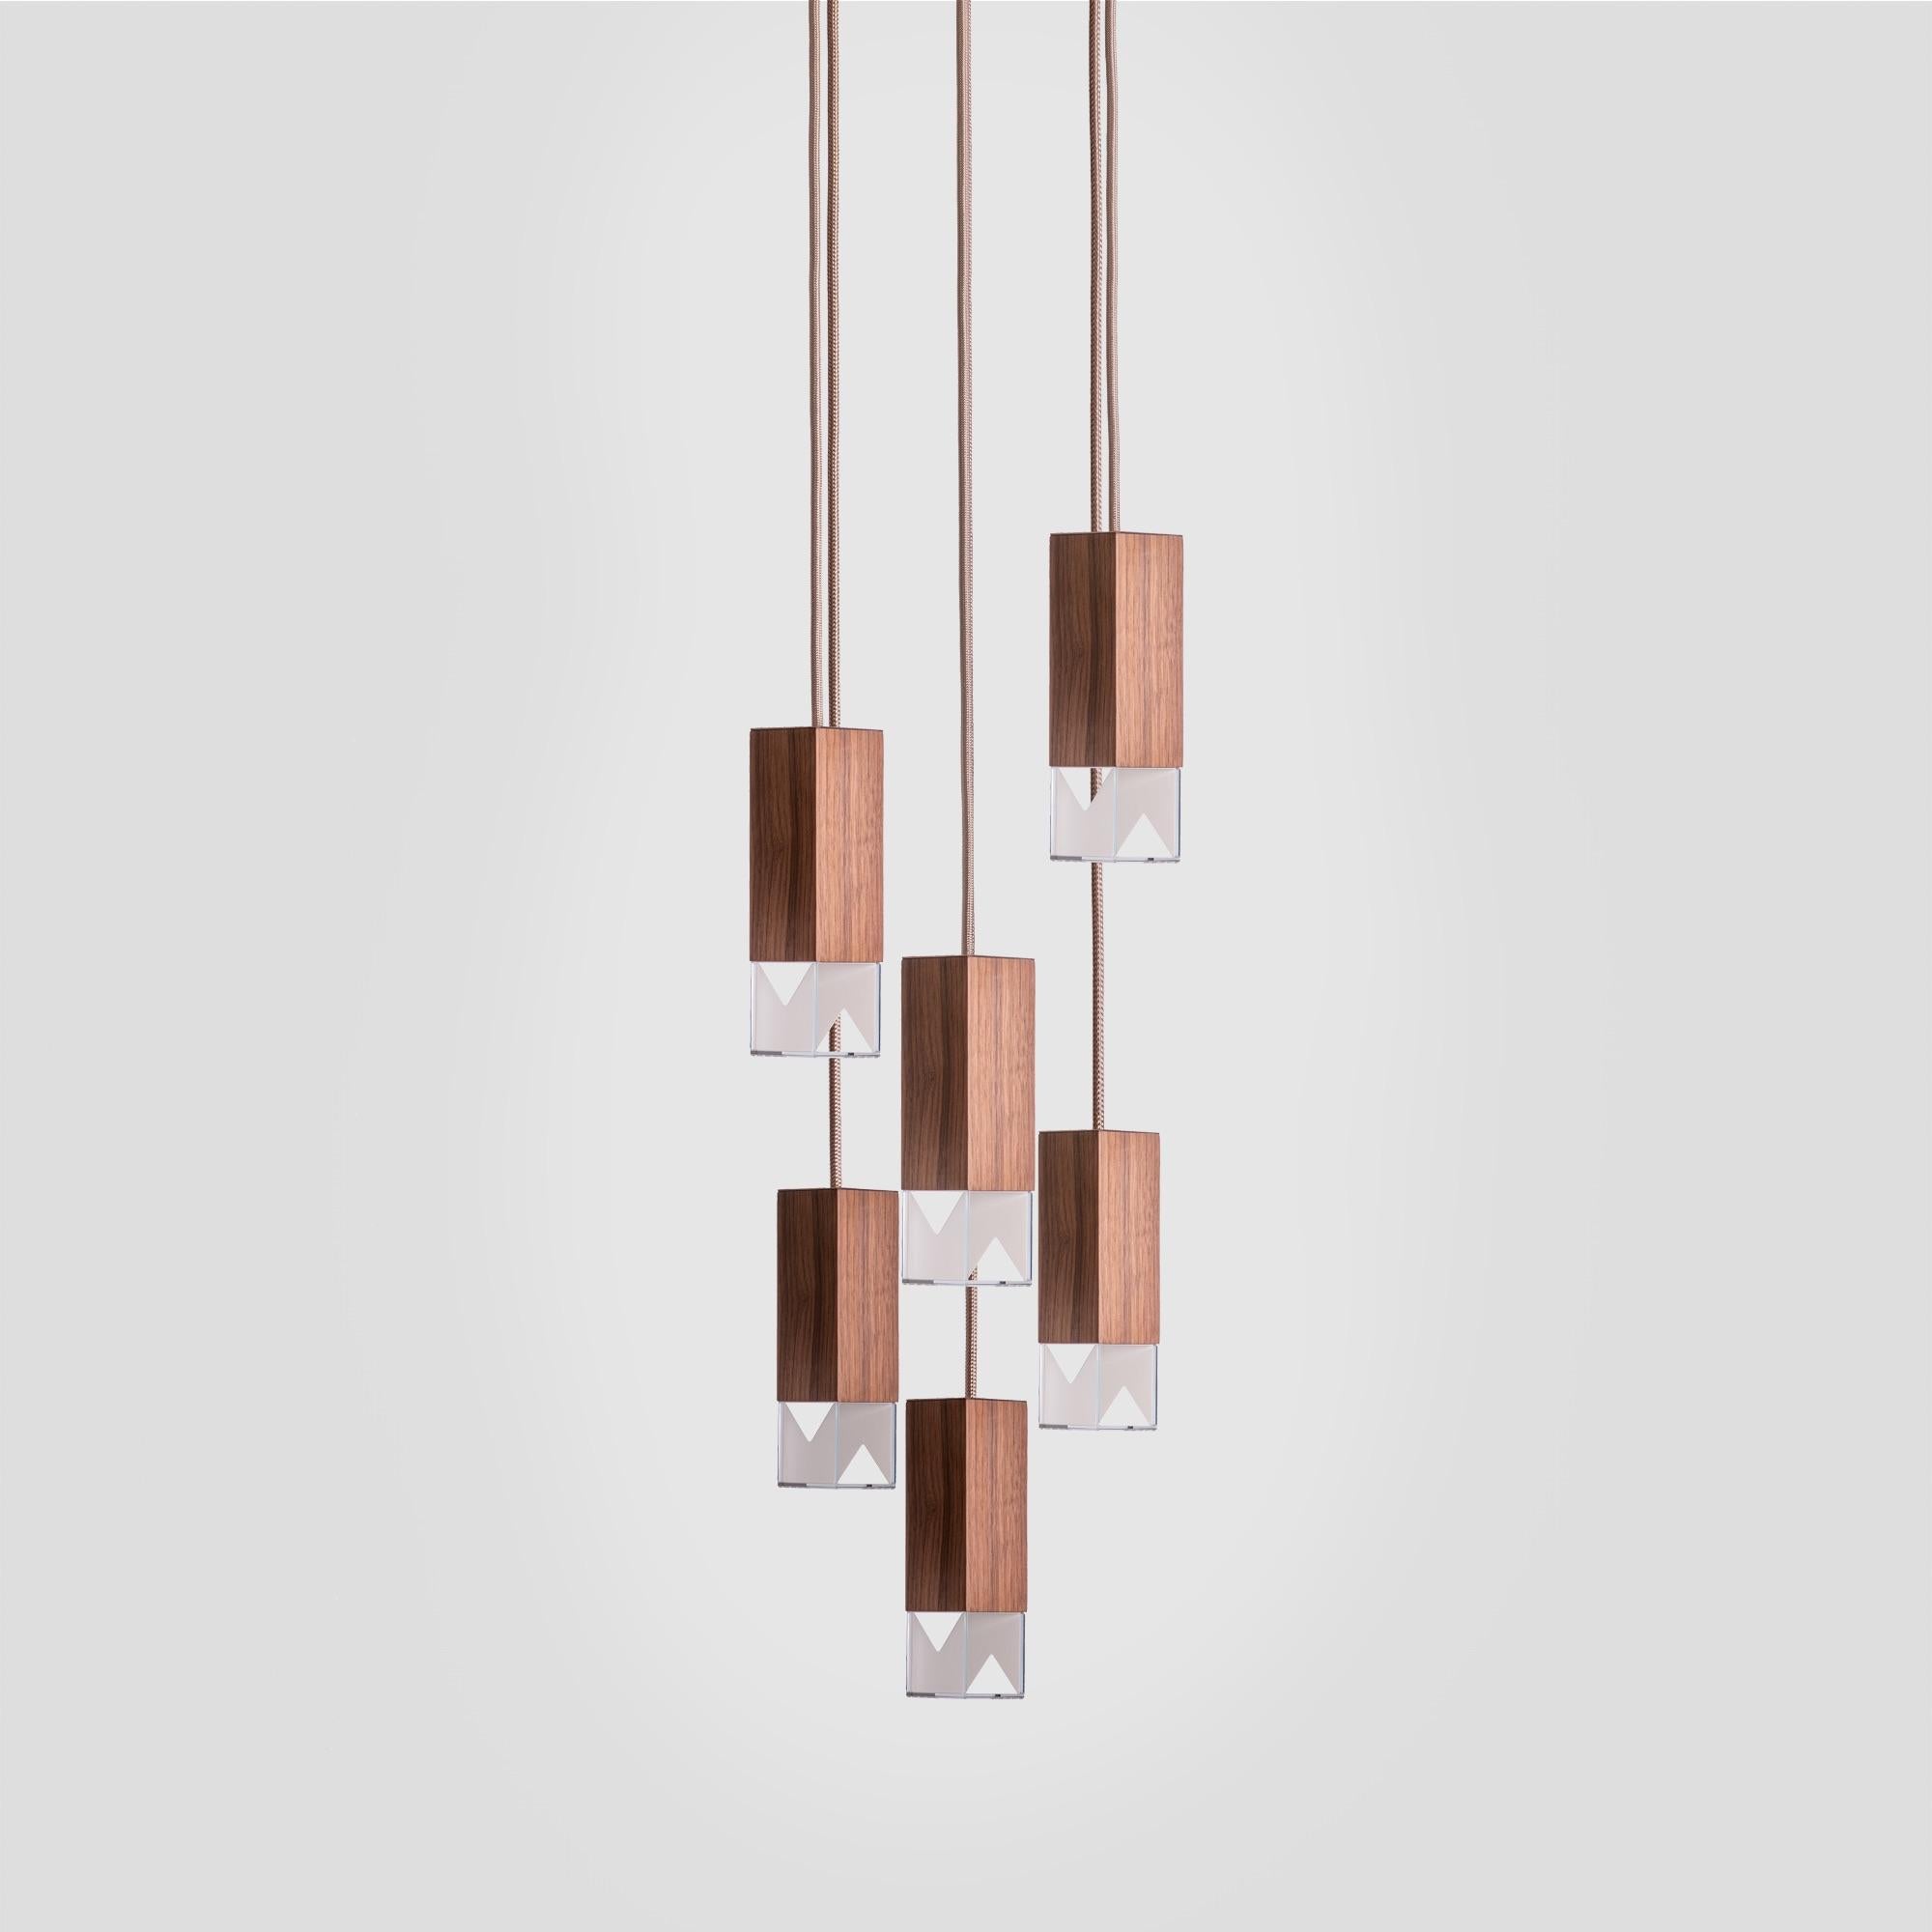 About
Suspension Lamp 6 Light Chandelier Walnut Wood Handmade by Formaminima

Lamp/One Wood 6 Light Chandelier from Chandeliers Series
Design by Formaminima
Chandelier
Materials:
Body lamp handcrafted in solid Canaletto walnut wood / crystal glass